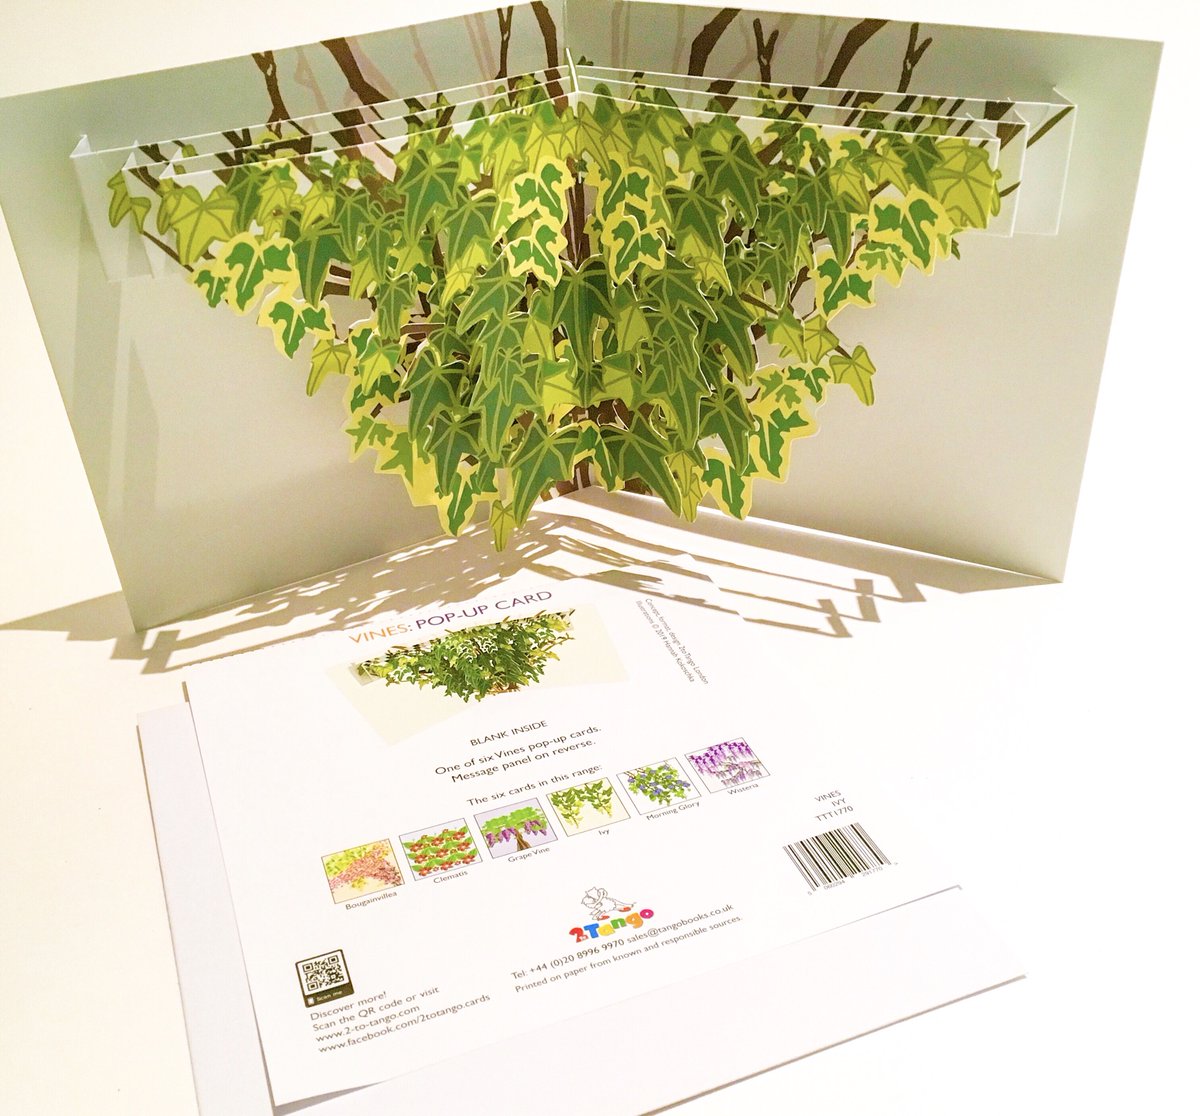 #ukgiftam @UKGiftHour @UKGiftHourPower a few more #vine themed #popupcards #greetingscards appropriate for this time of year that can be framed and kept #sustainability #gift 2-to-tango.com